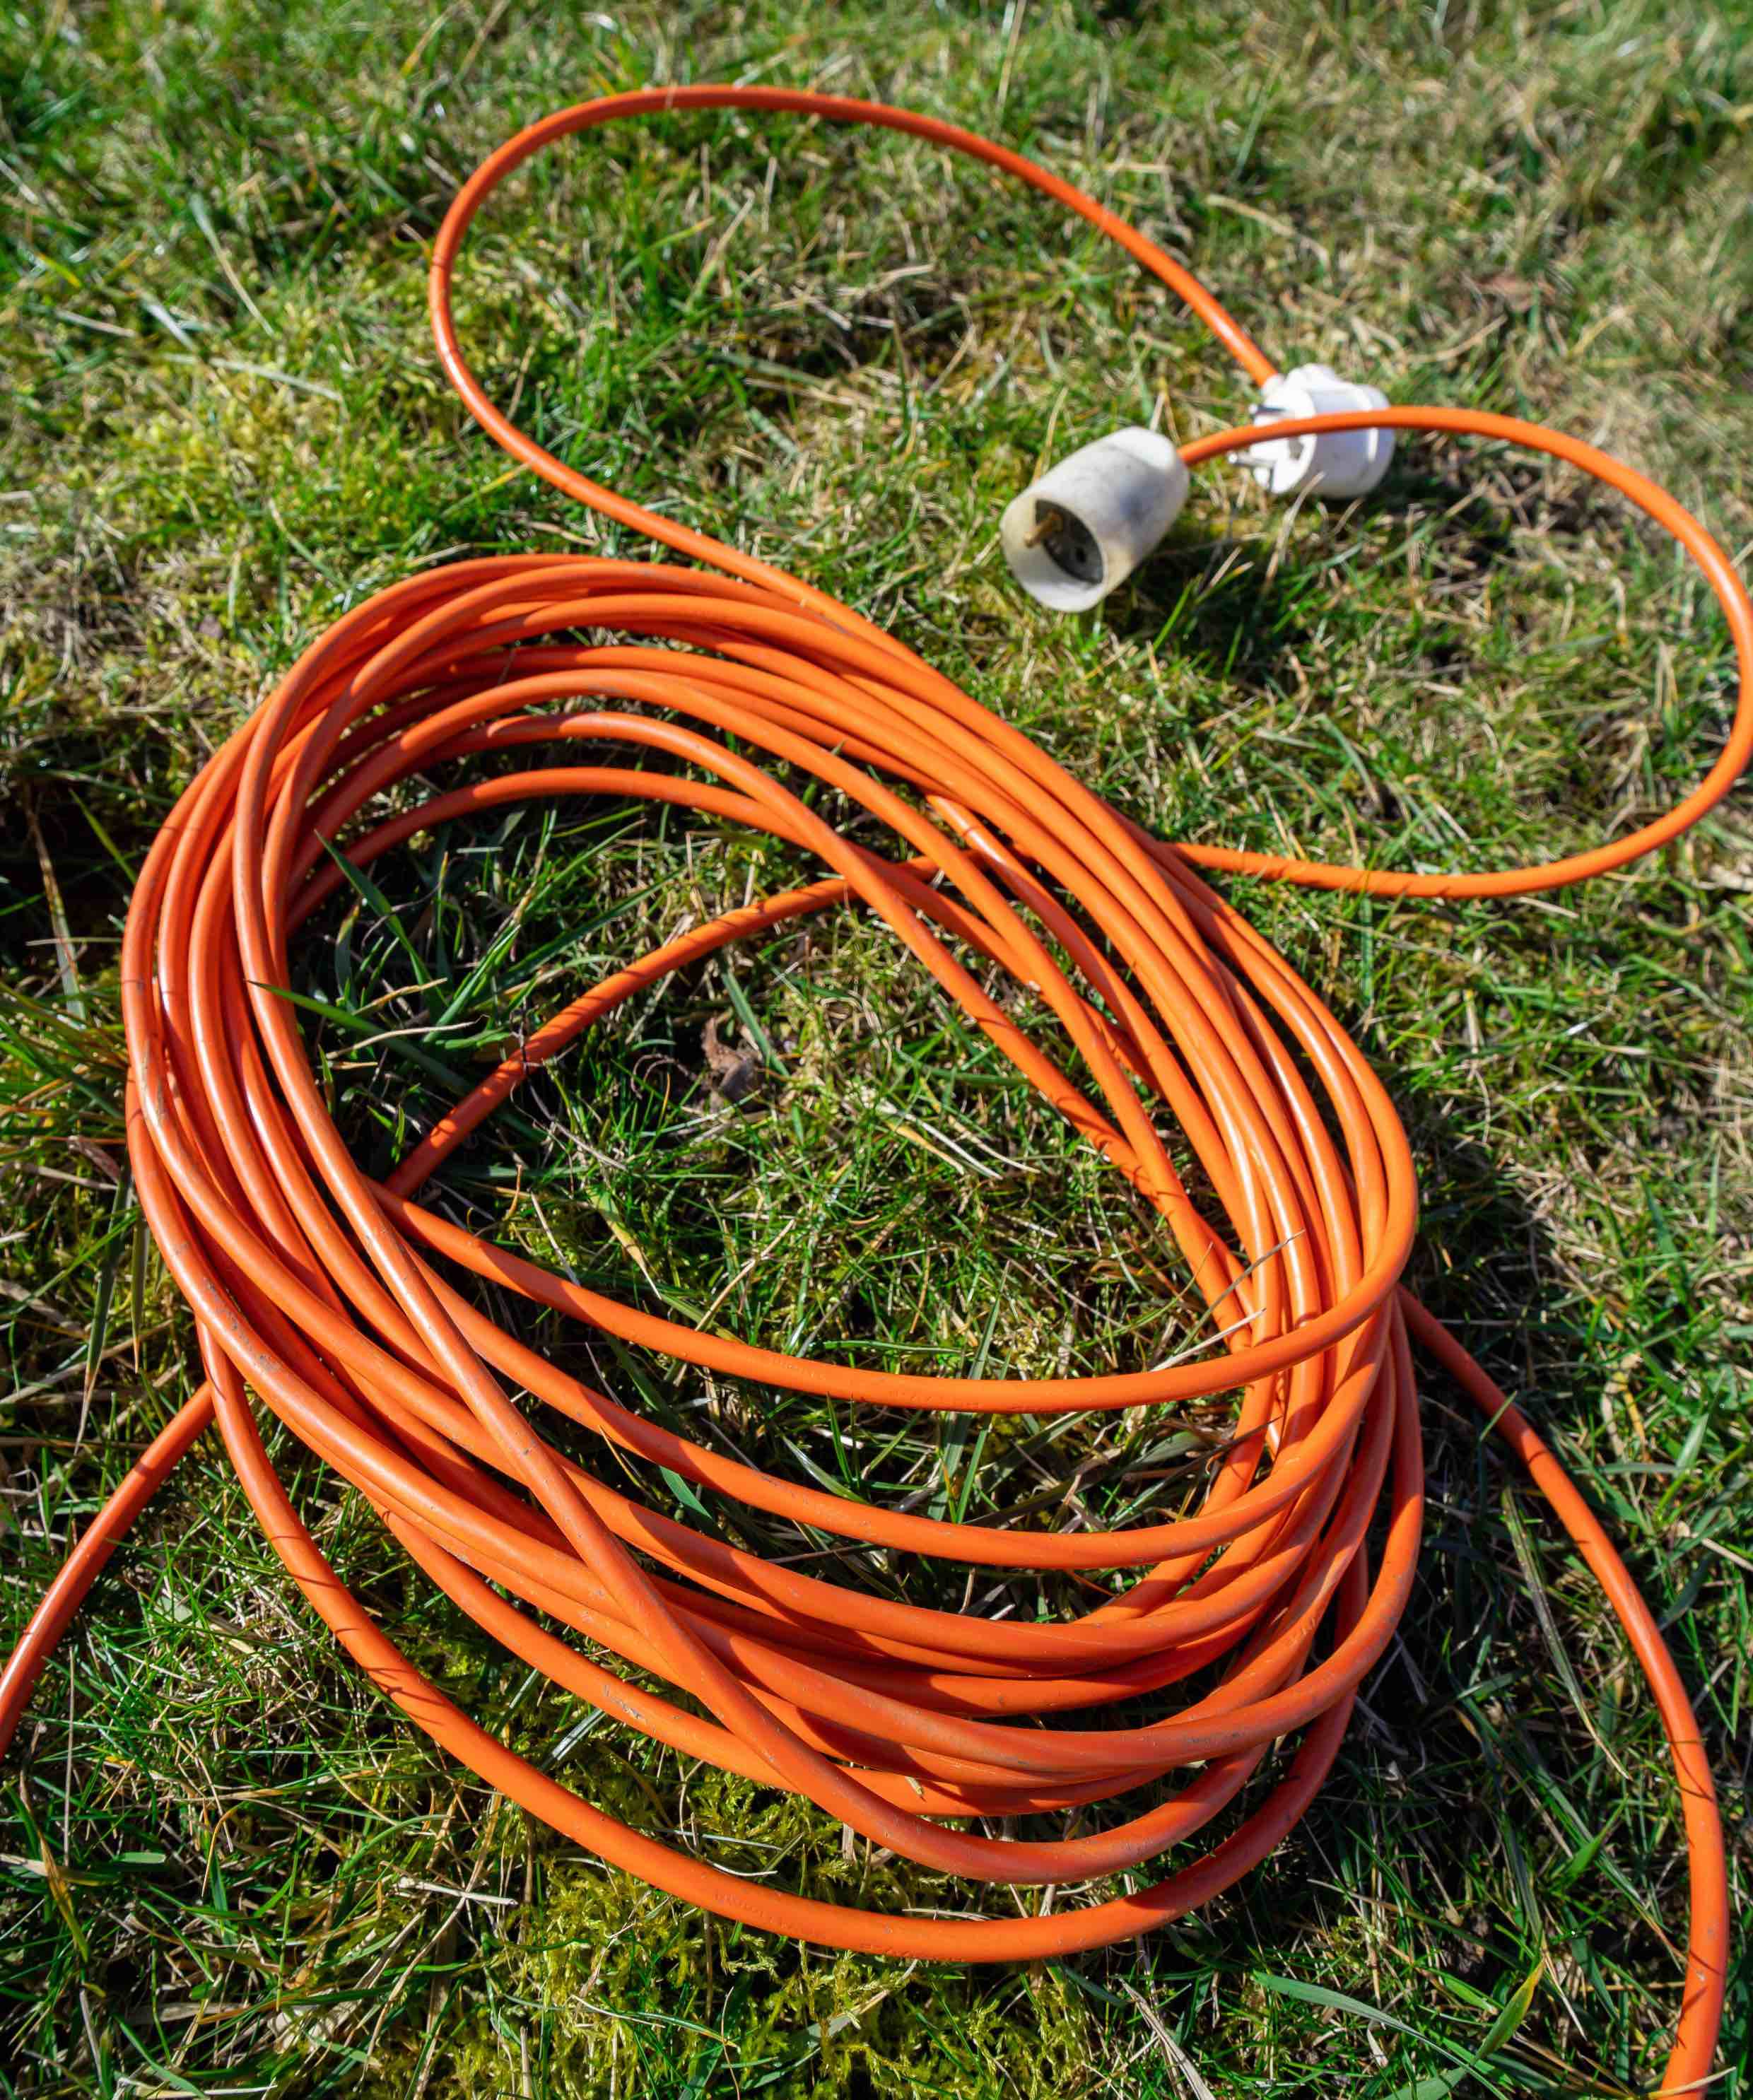 A long, orange extension cord in grass - learn tips to best utilize extension cords and keep your home safe with Custom Electrical.